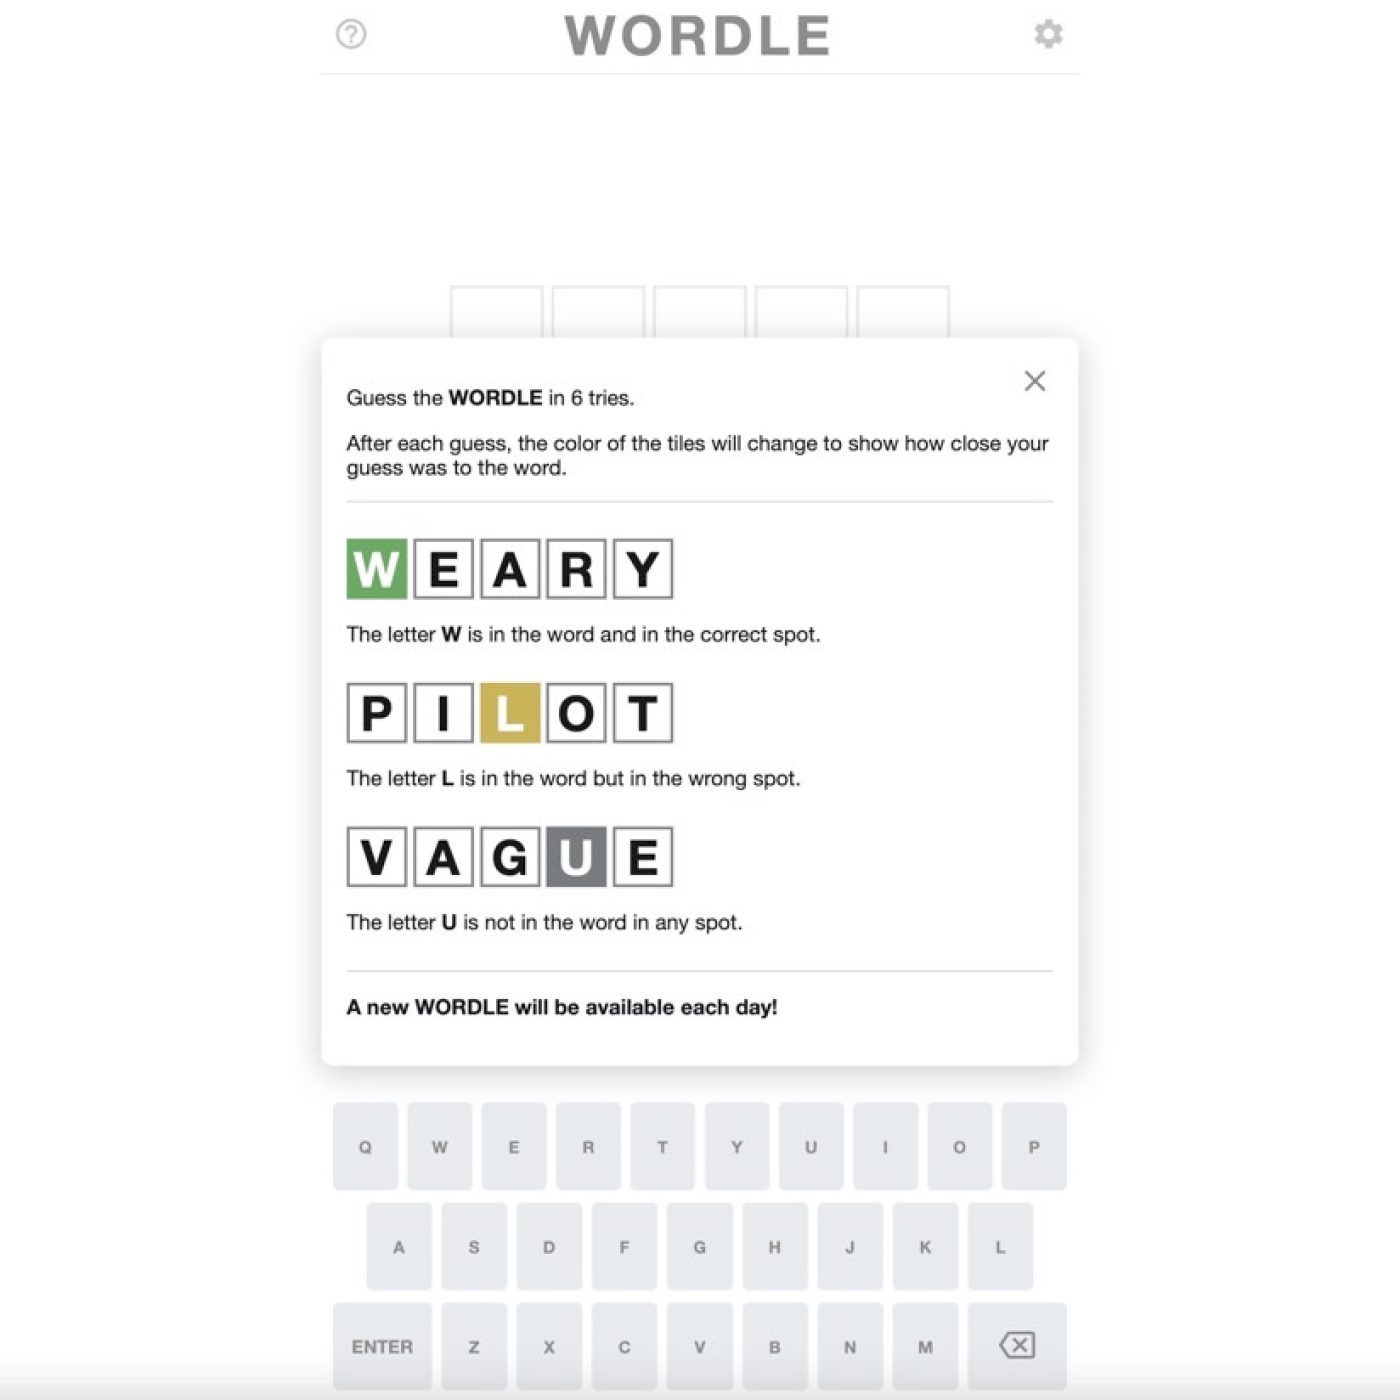 Viral online game Wordle will stay ad-free, no mobile version